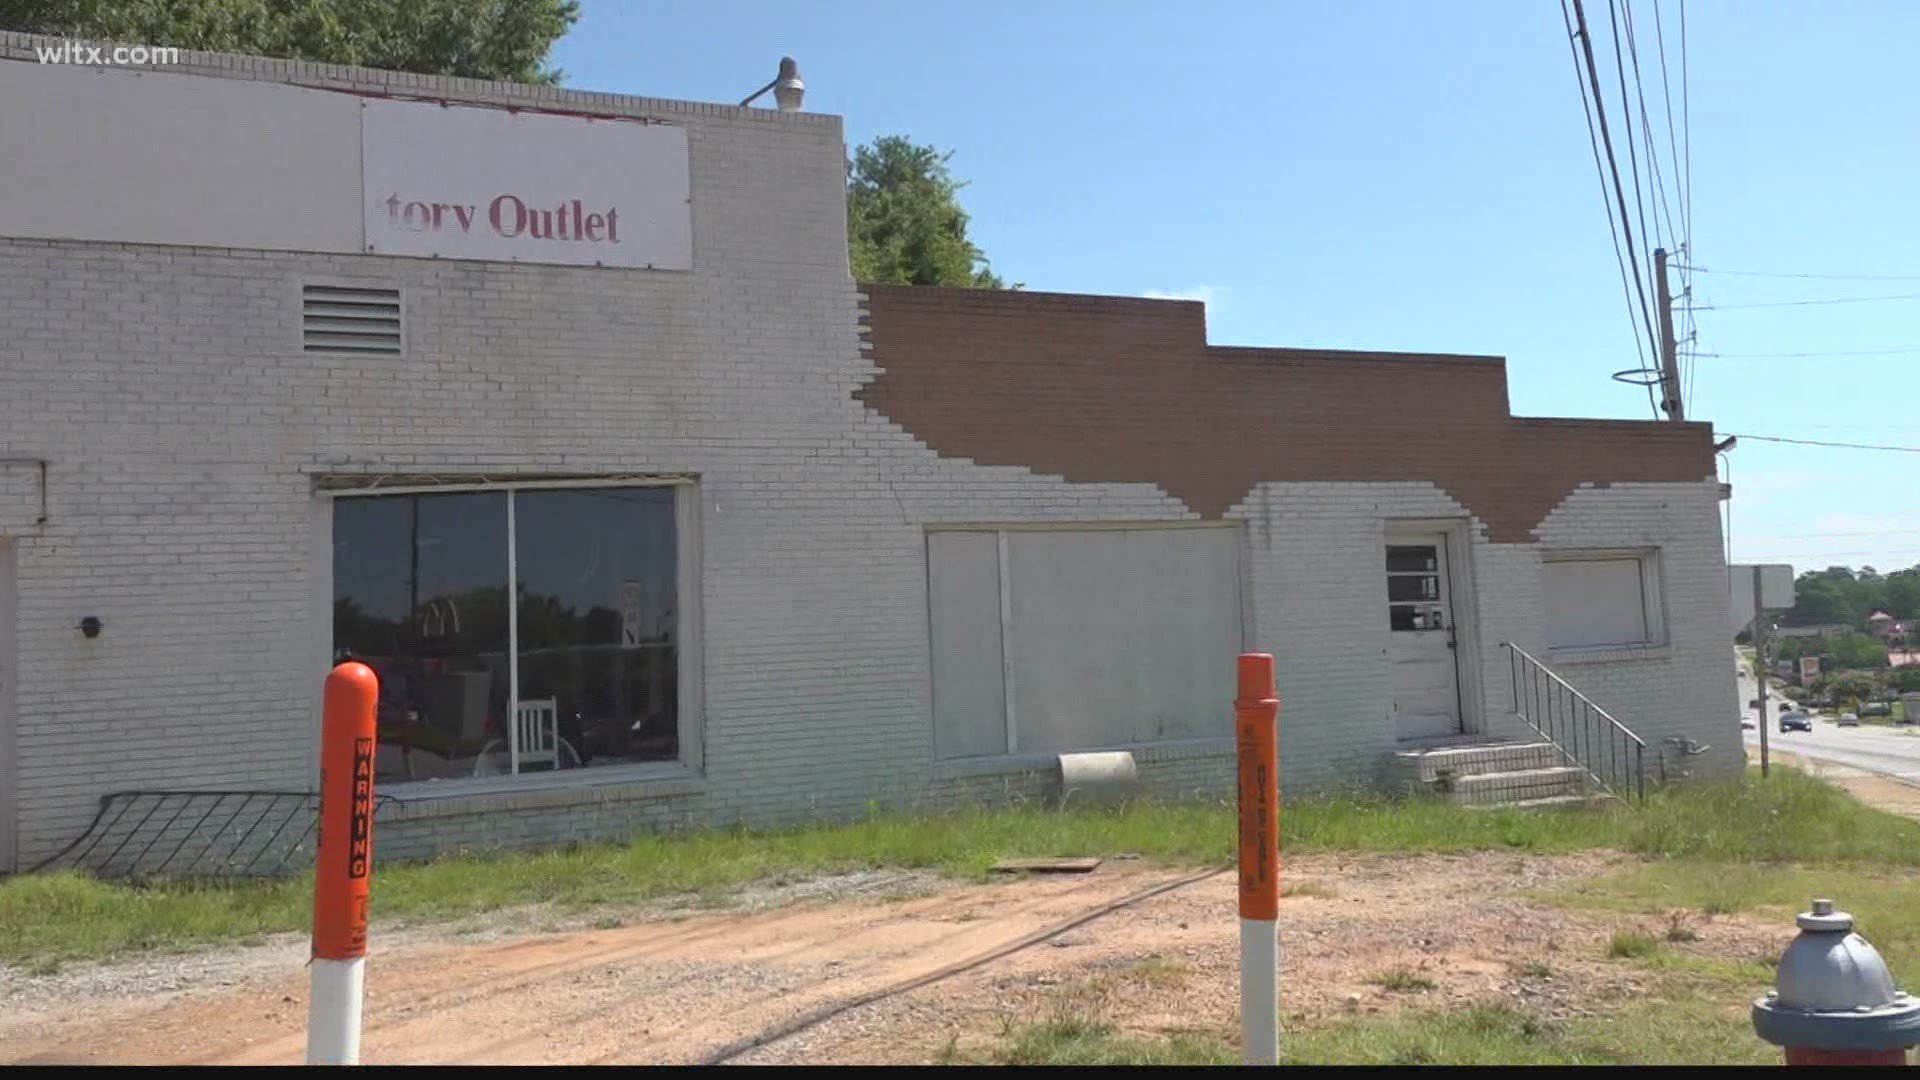 The old furniture store had been empty for years and many people in town were tired of looking at it.